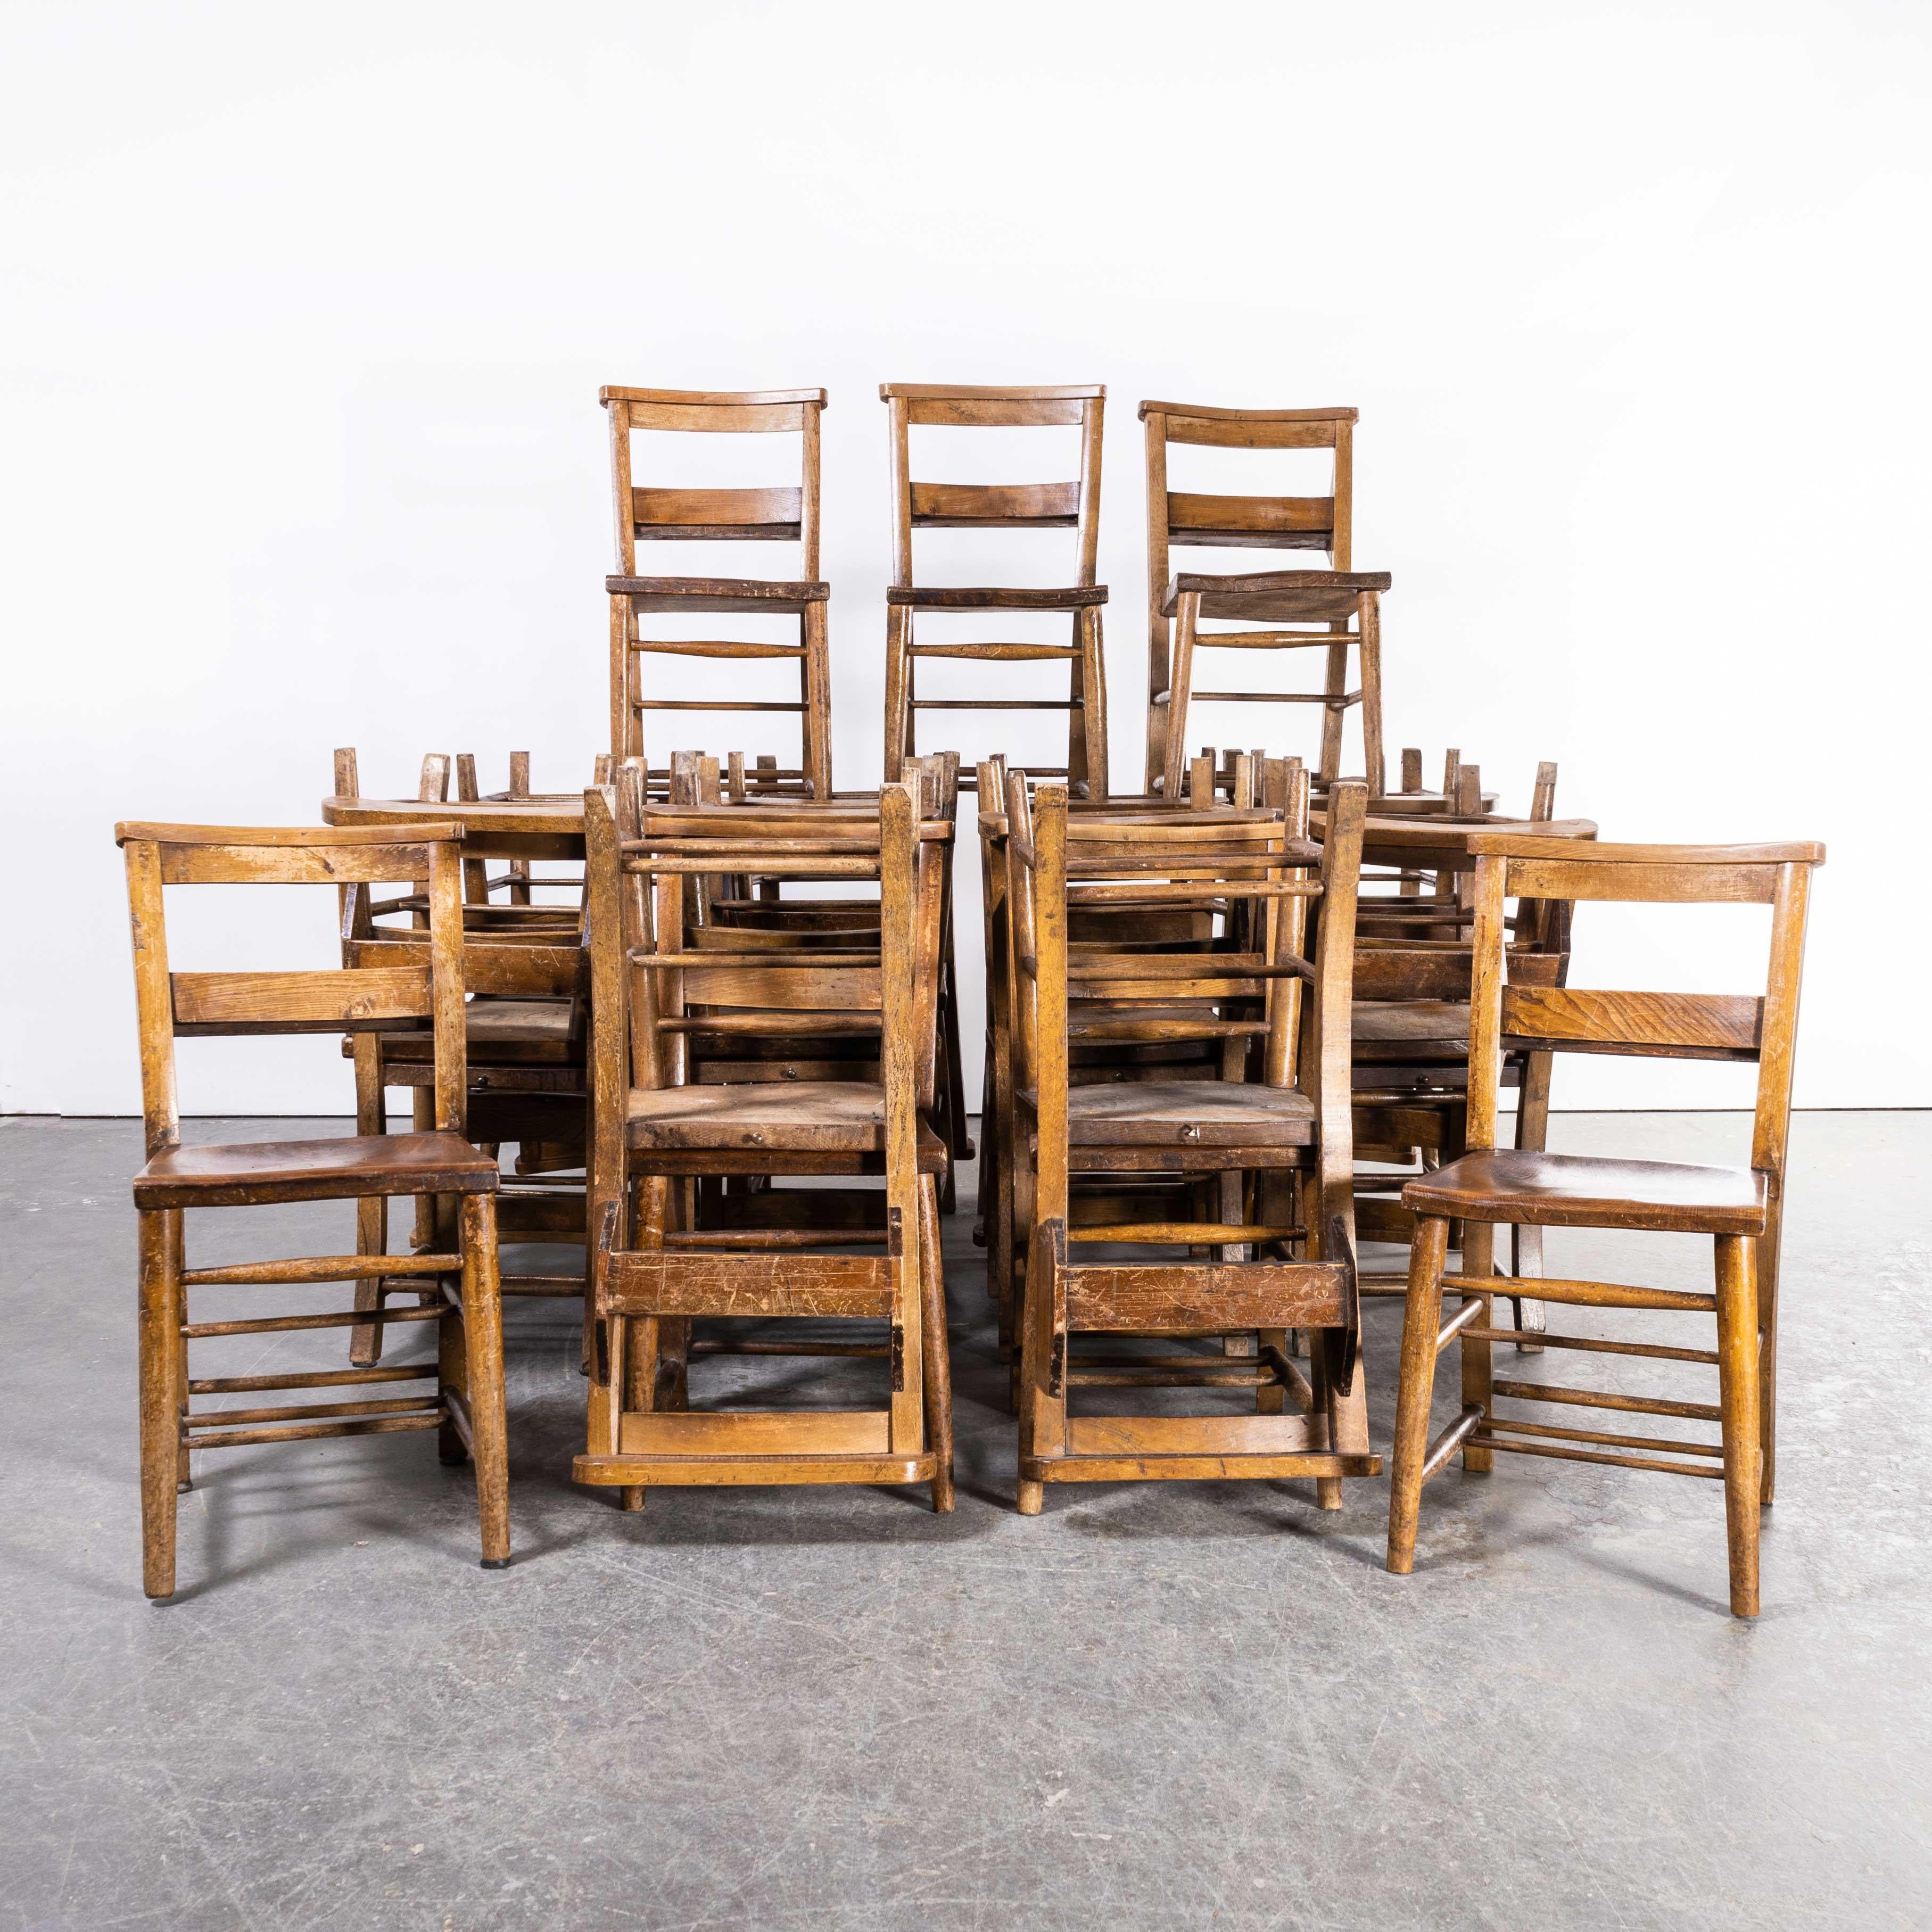 1940’s Ash Church – Chapel dining chairs – large quantities available
1940’s Ash Church – Chapel dining chairs – large quantities available. England has a wonderfully rich heritage for making chairs. At the height of production at the turn of the